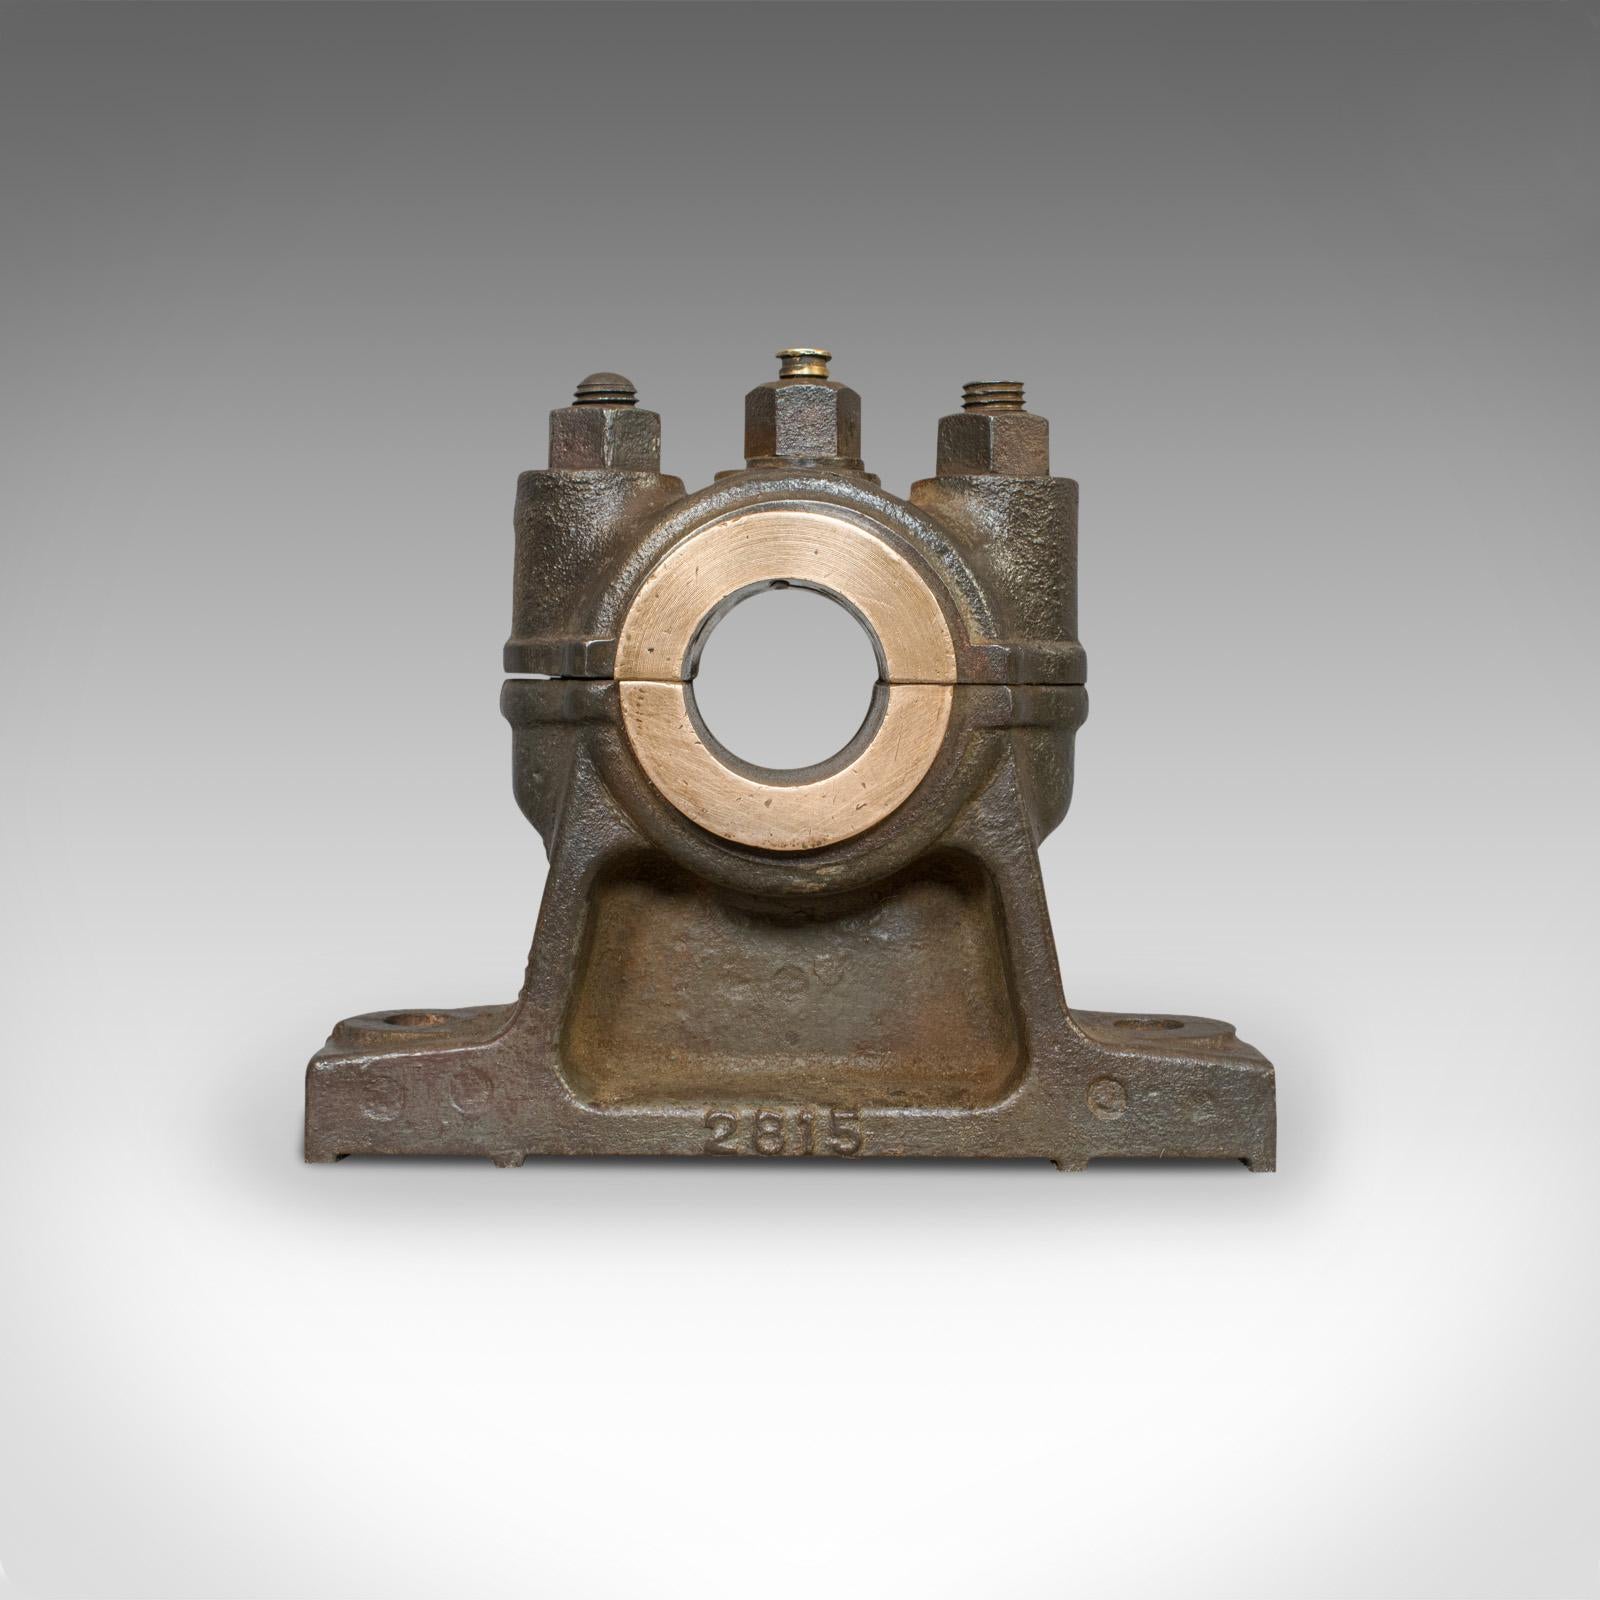 This is an antique engine bearing with polished finish. An English, cast iron and bronze desk ornament or paperweight, and dating to the Victorian period, circa 1900.

Fascinating mechanical form and interest
Displays a desirable aged